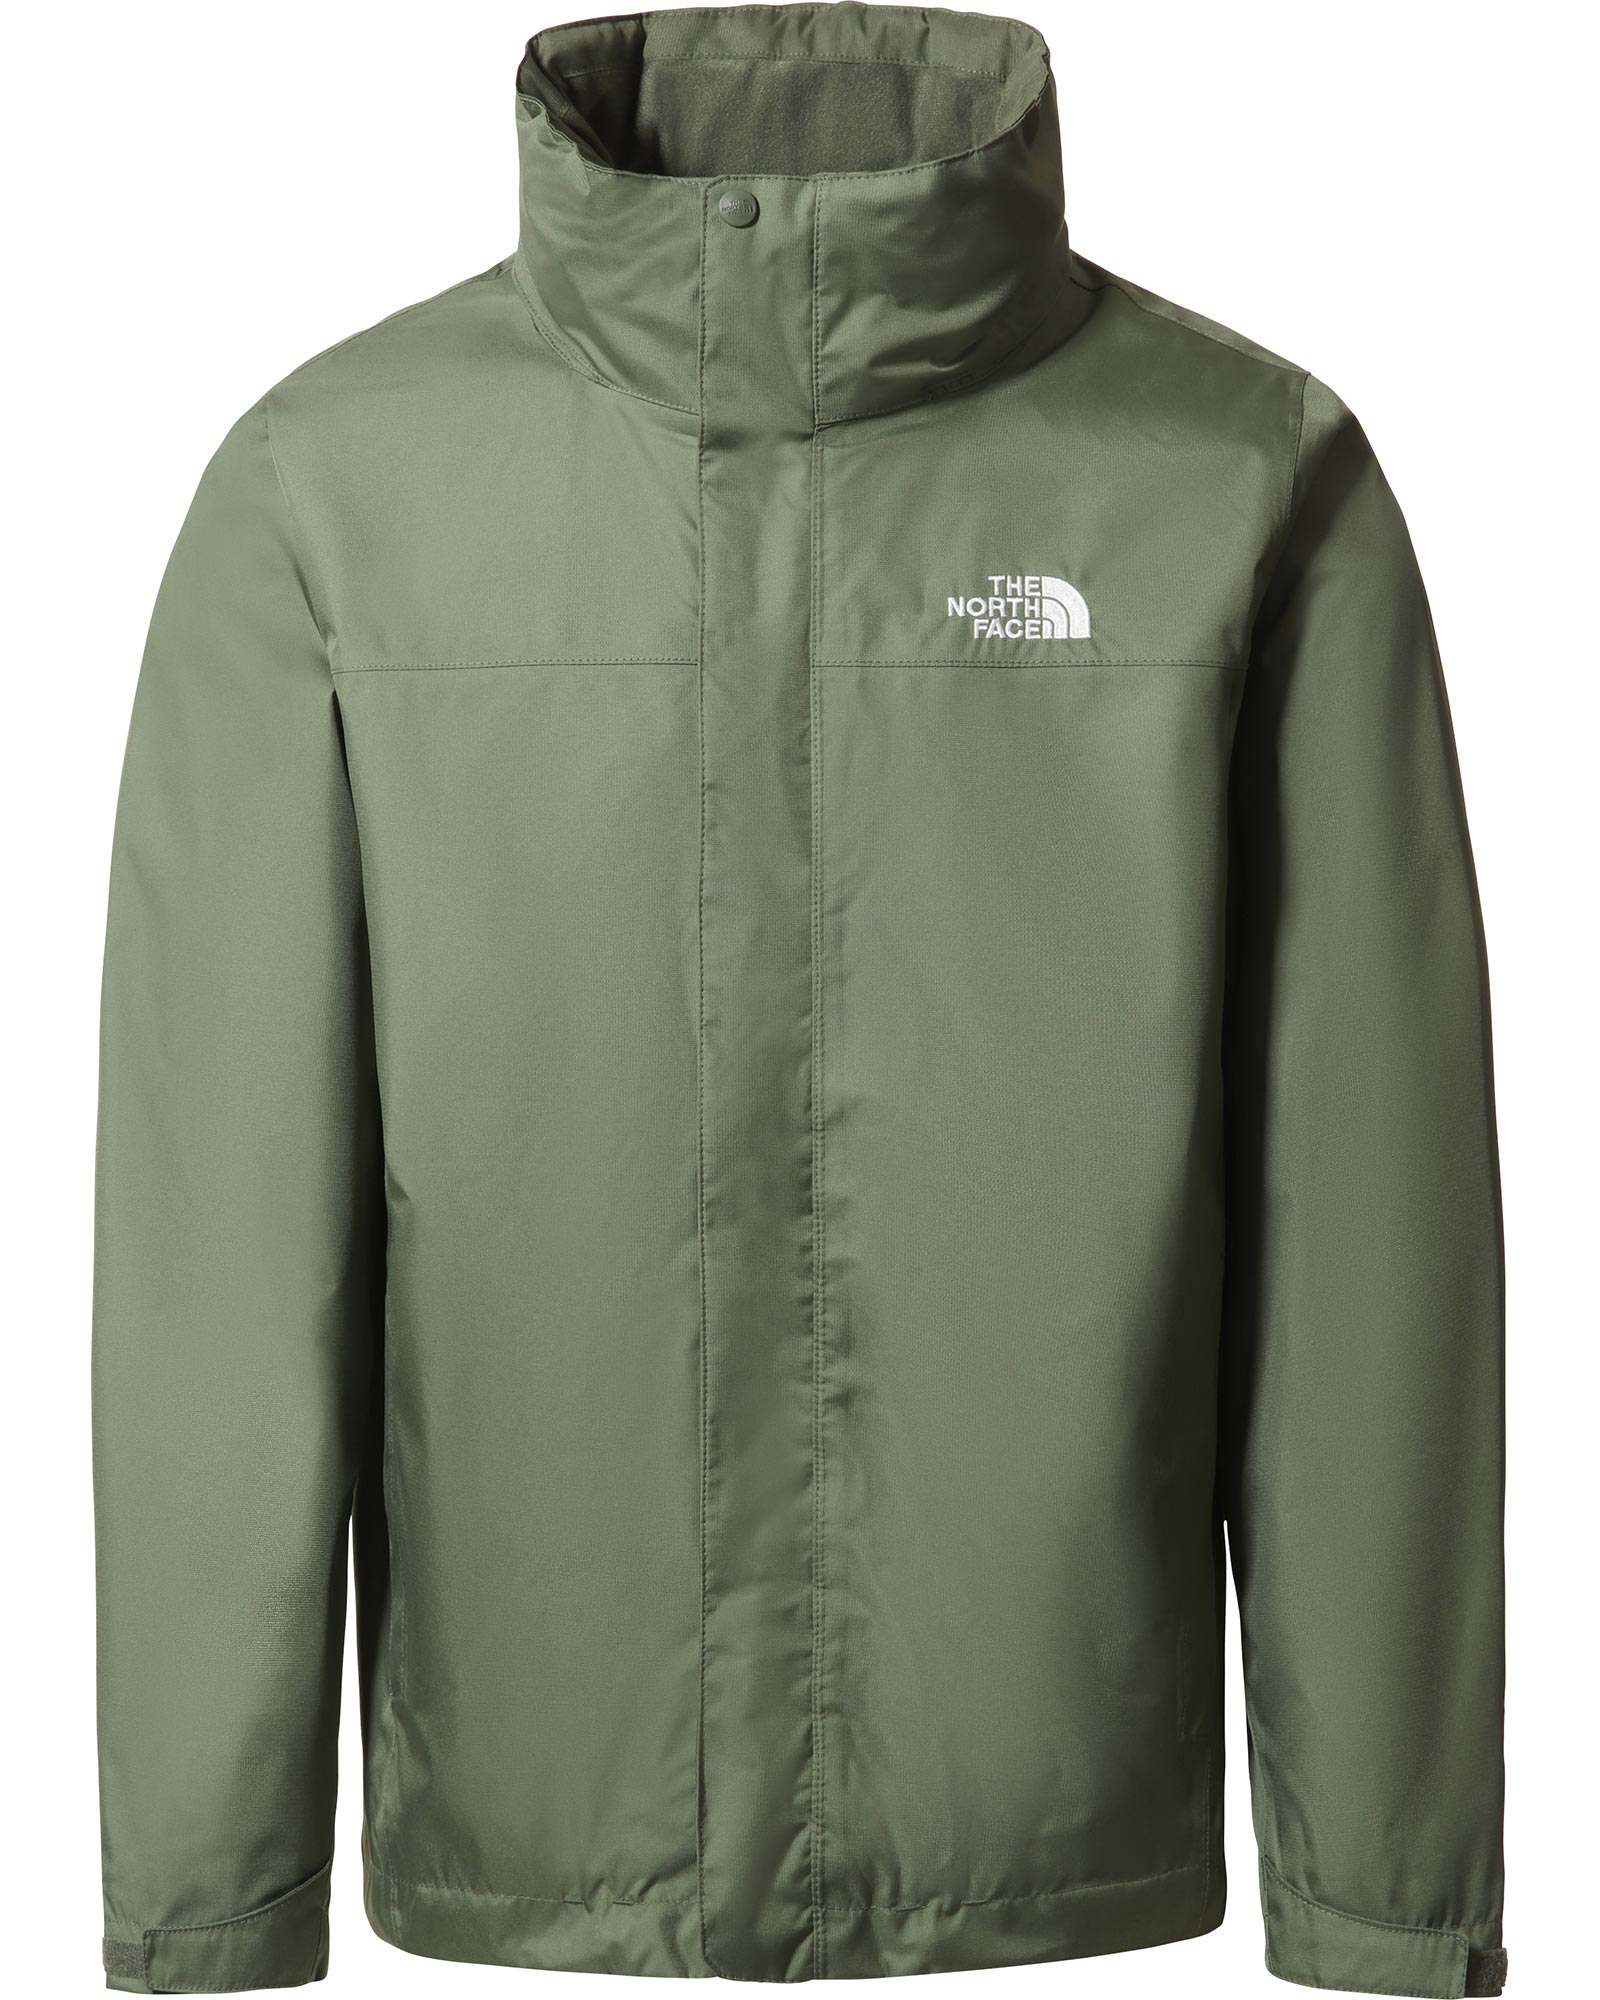 The North Face Evolve Triclimate Men’s Jacket - Thyme Green XL